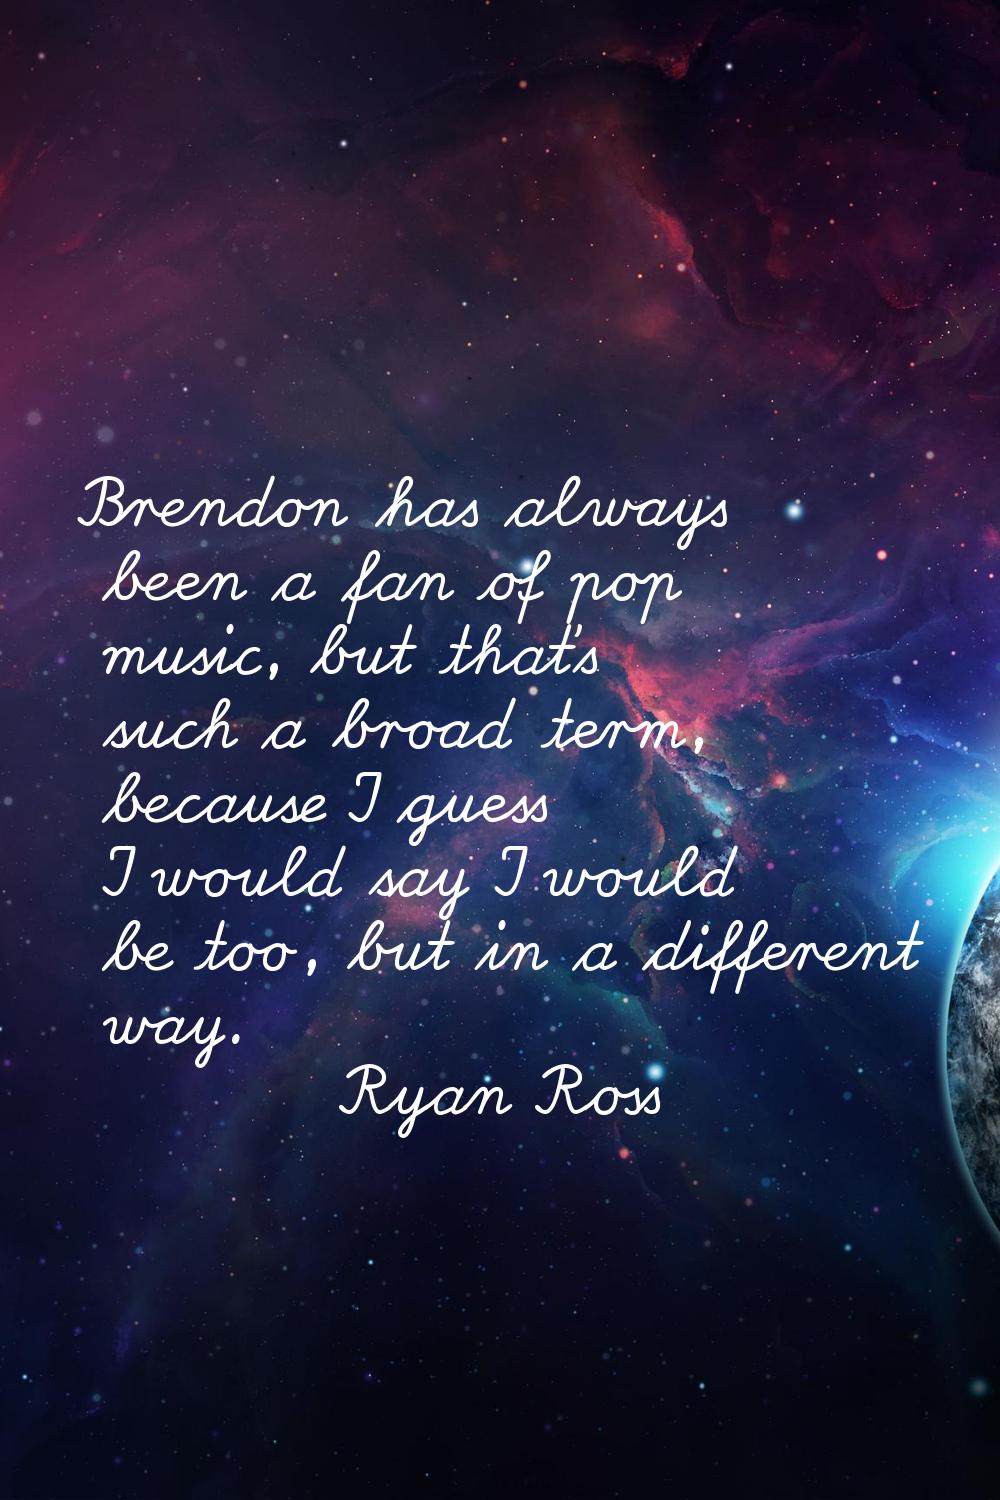 Brendon has always been a fan of pop music, but that's such a broad term, because I guess I would s